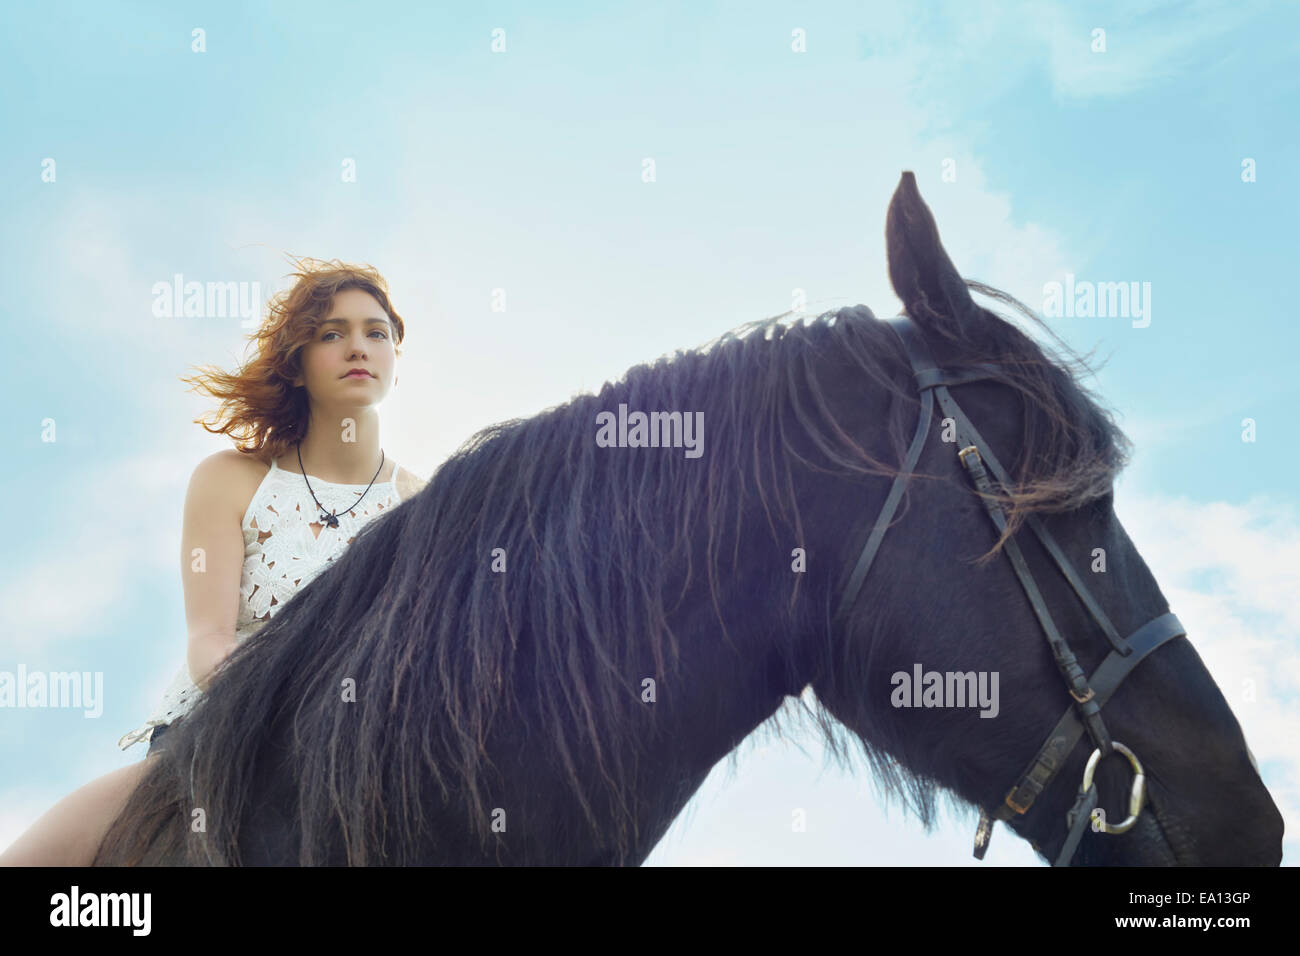 Portrait of young woman on horse Stock Photo